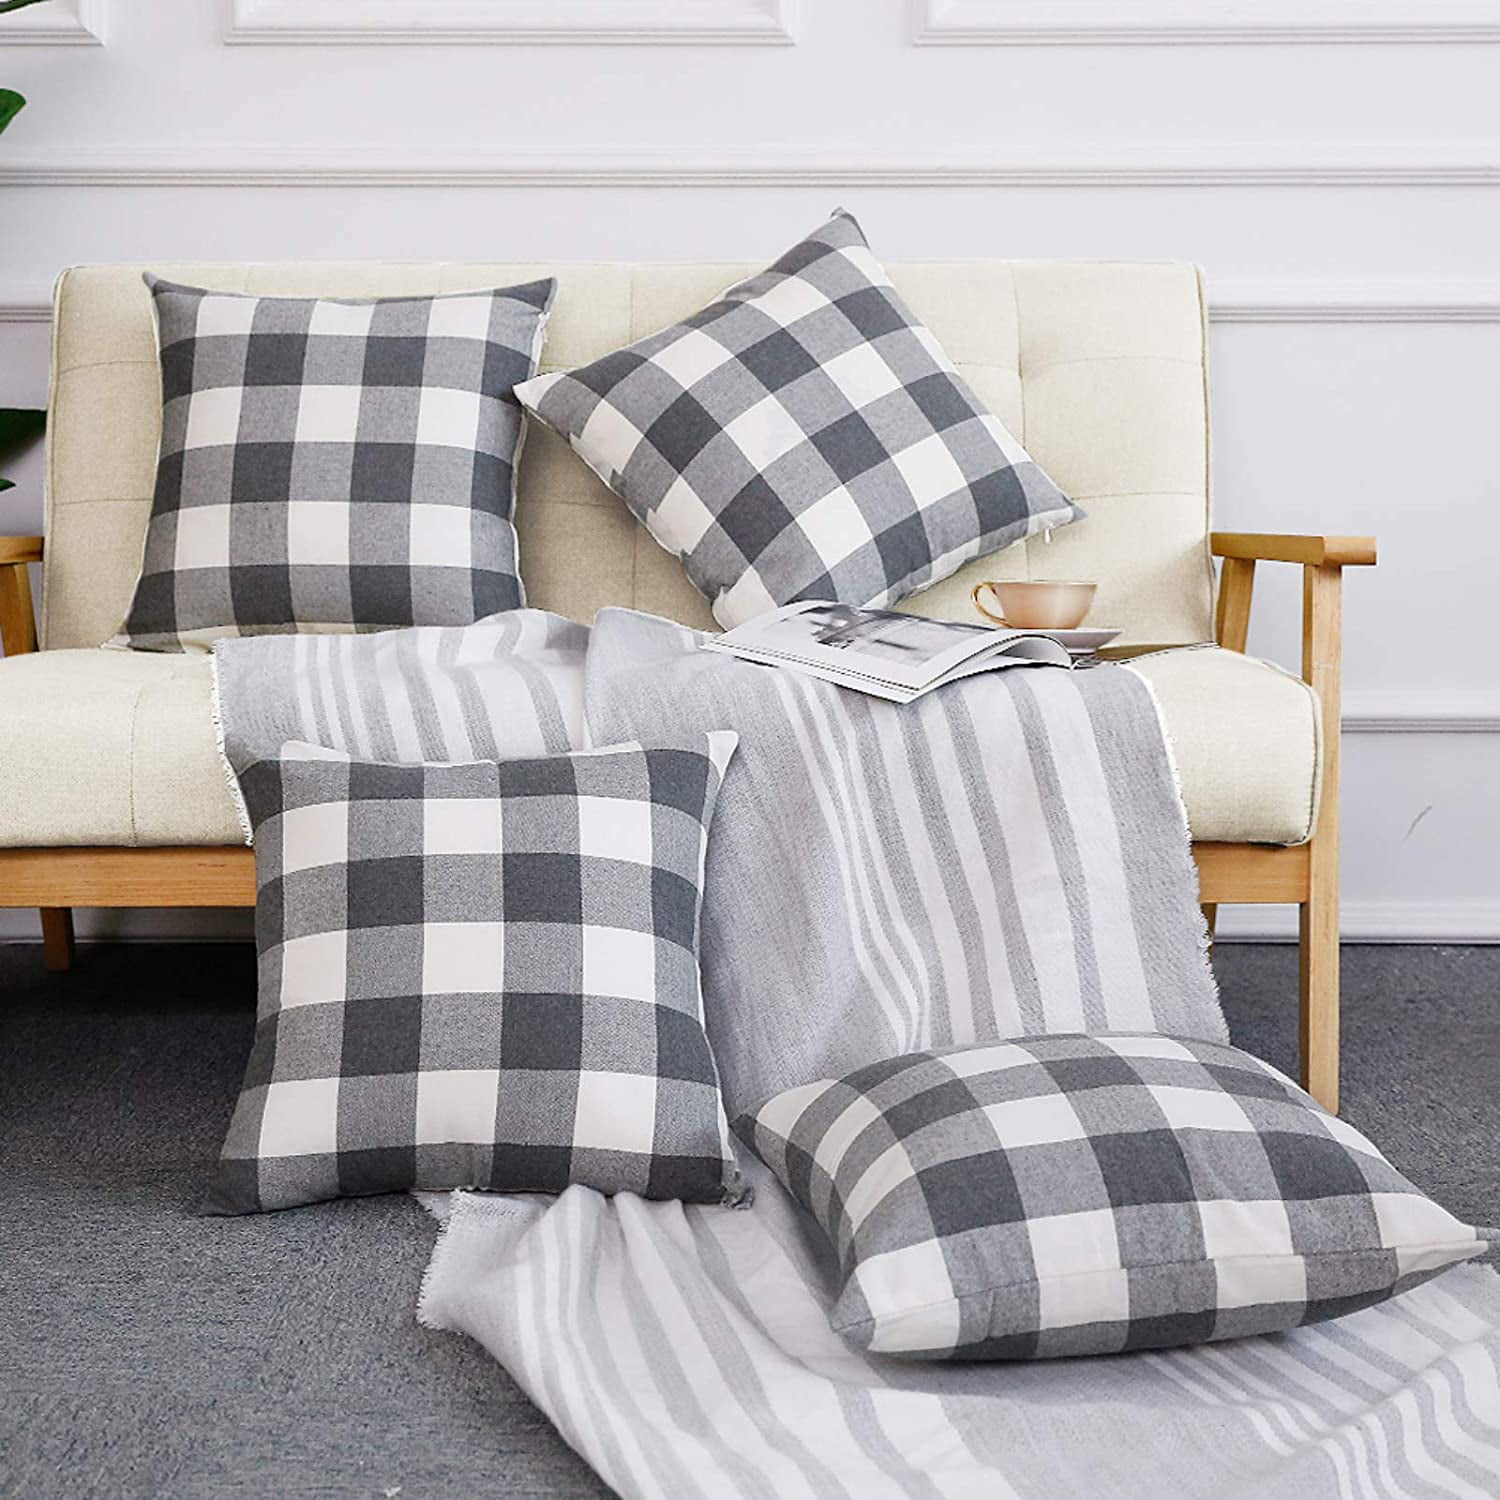 4 pack 18x18 Pack White and Black Buffalo Check Plaid Throw Pillow Case Covers 